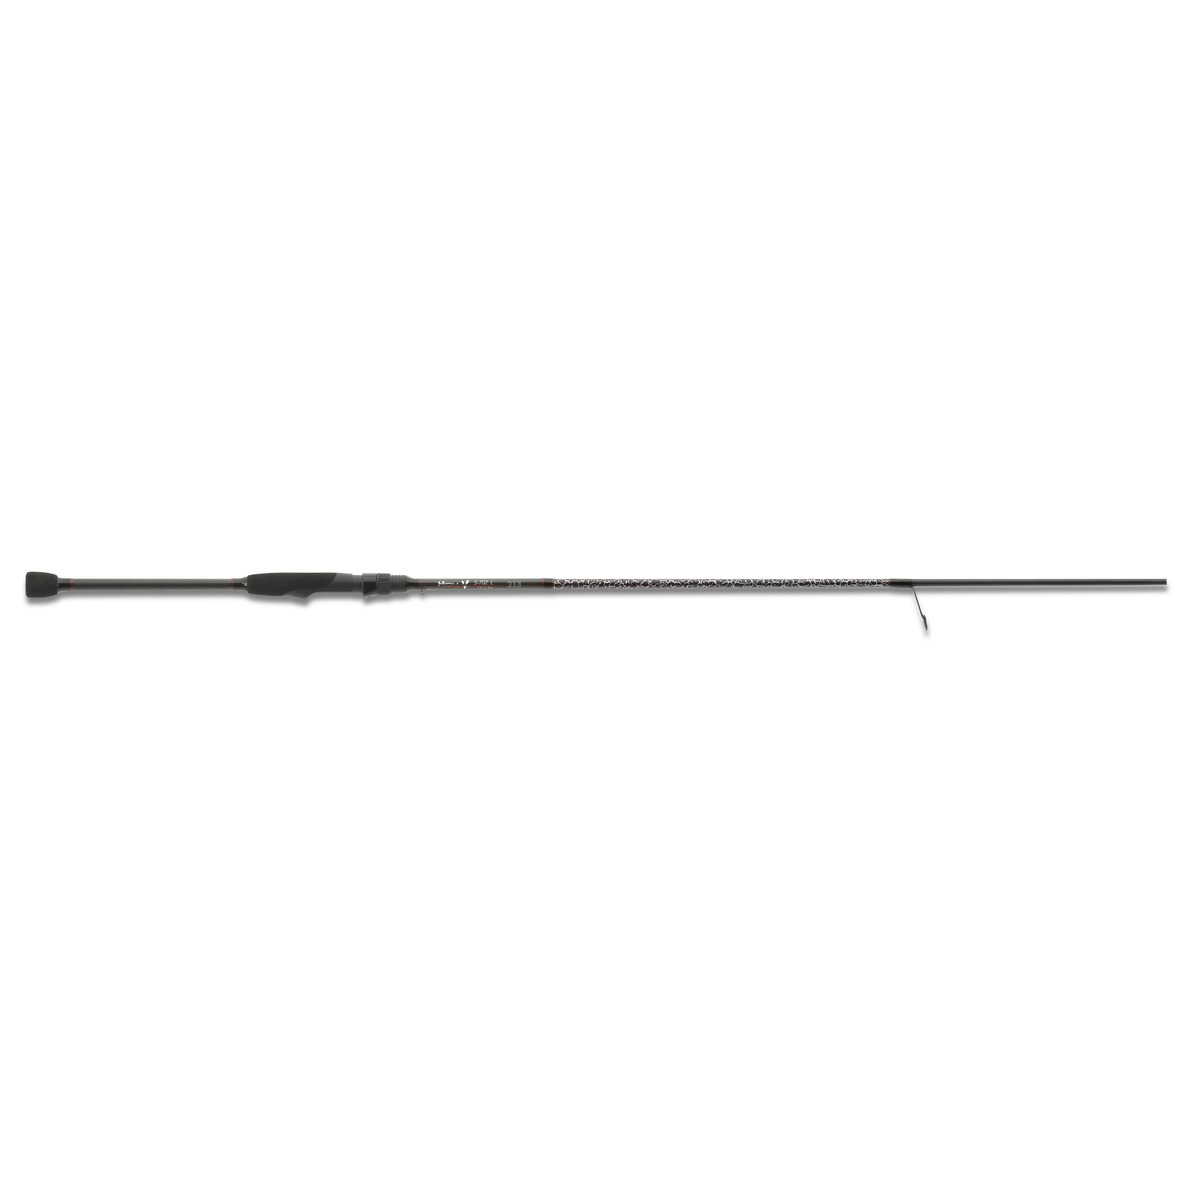 Iron Claw High-v Pike - S-662L 198 4-18 g